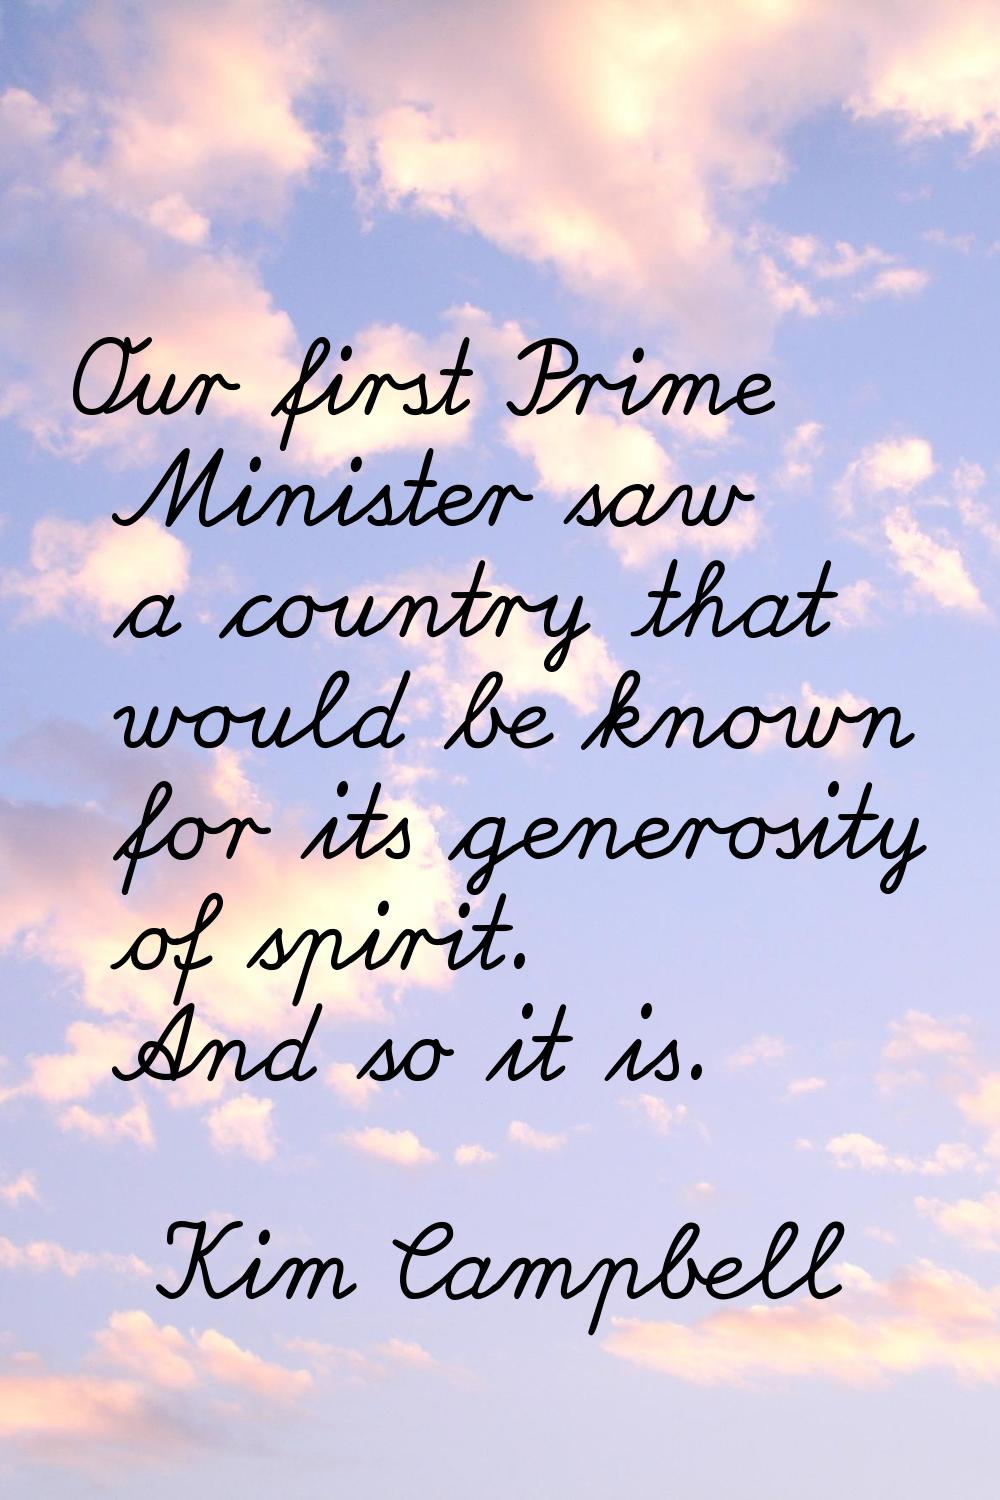 Our first Prime Minister saw a country that would be known for its generosity of spirit. And so it 